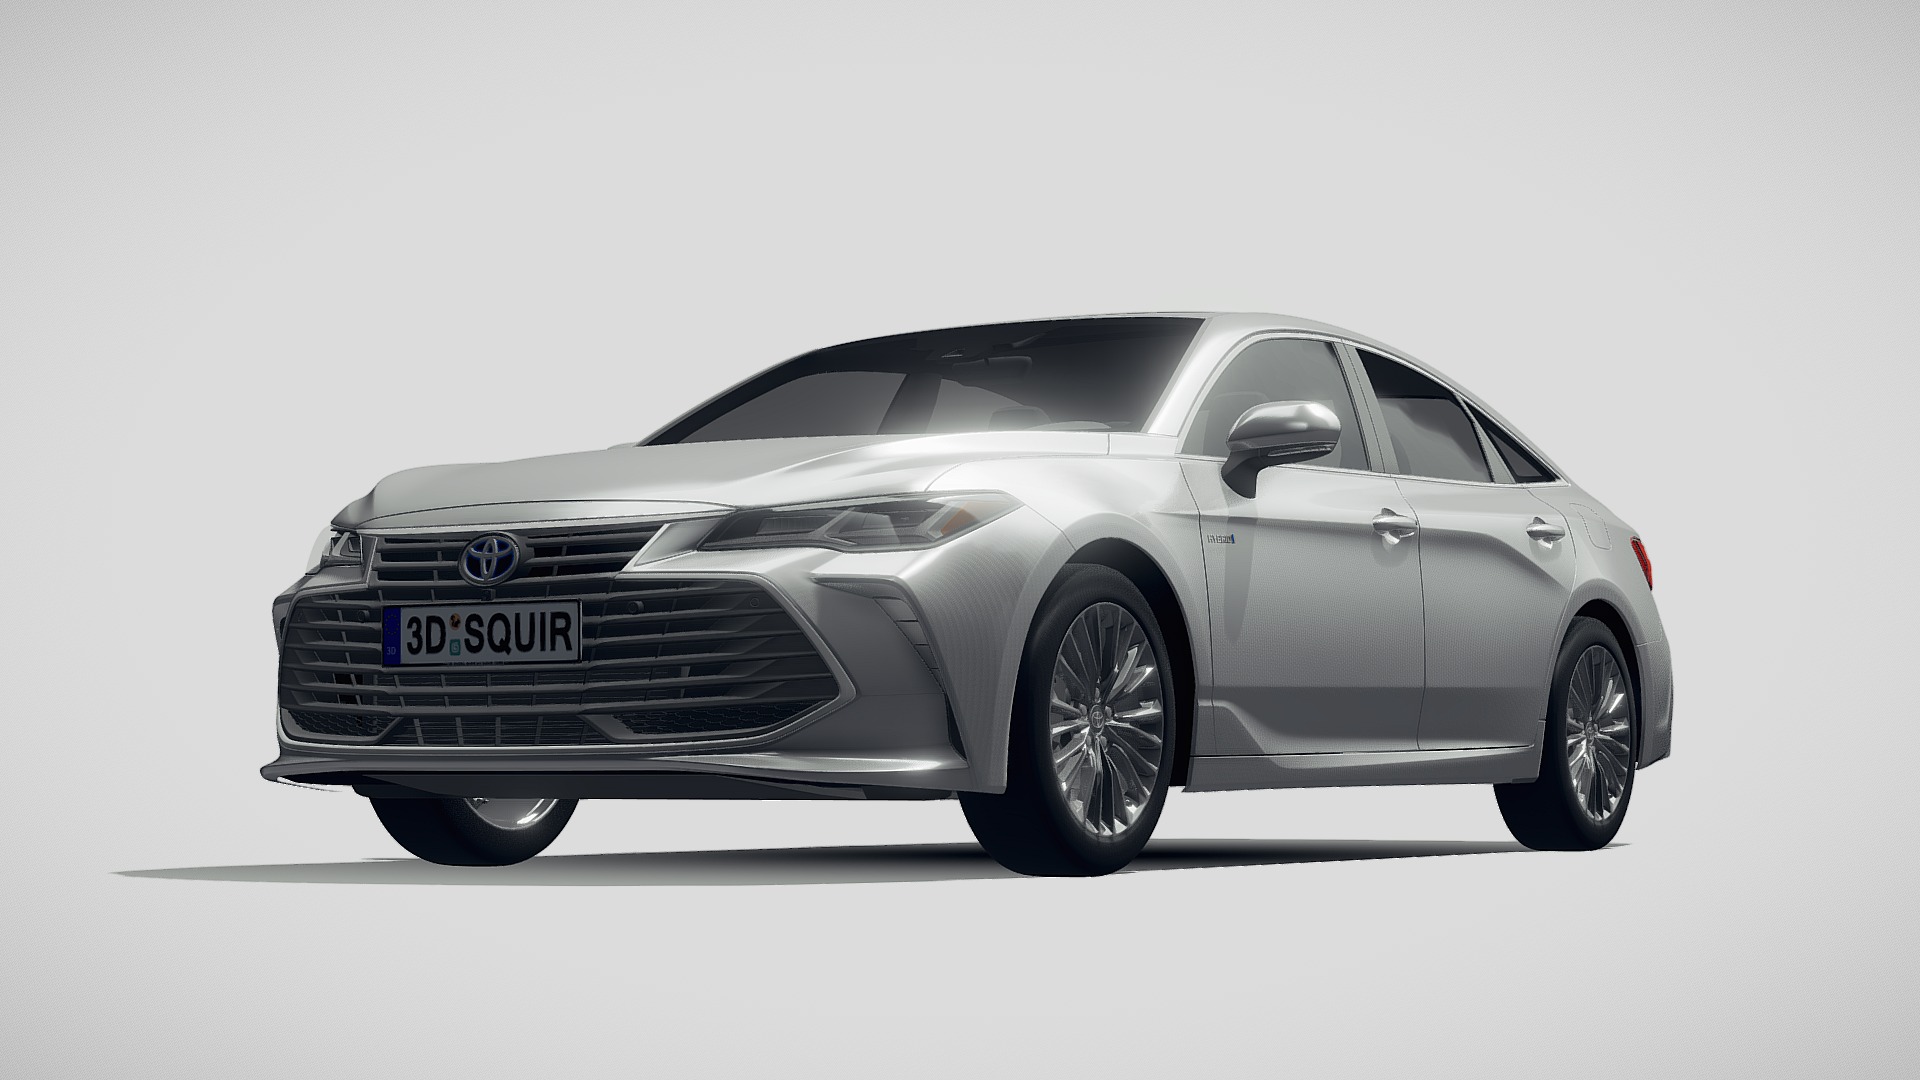 3D model Toyota Avalon Hybrid 2019 - This is a 3D model of the Toyota Avalon Hybrid 2019. The 3D model is about a silver car with a black background.